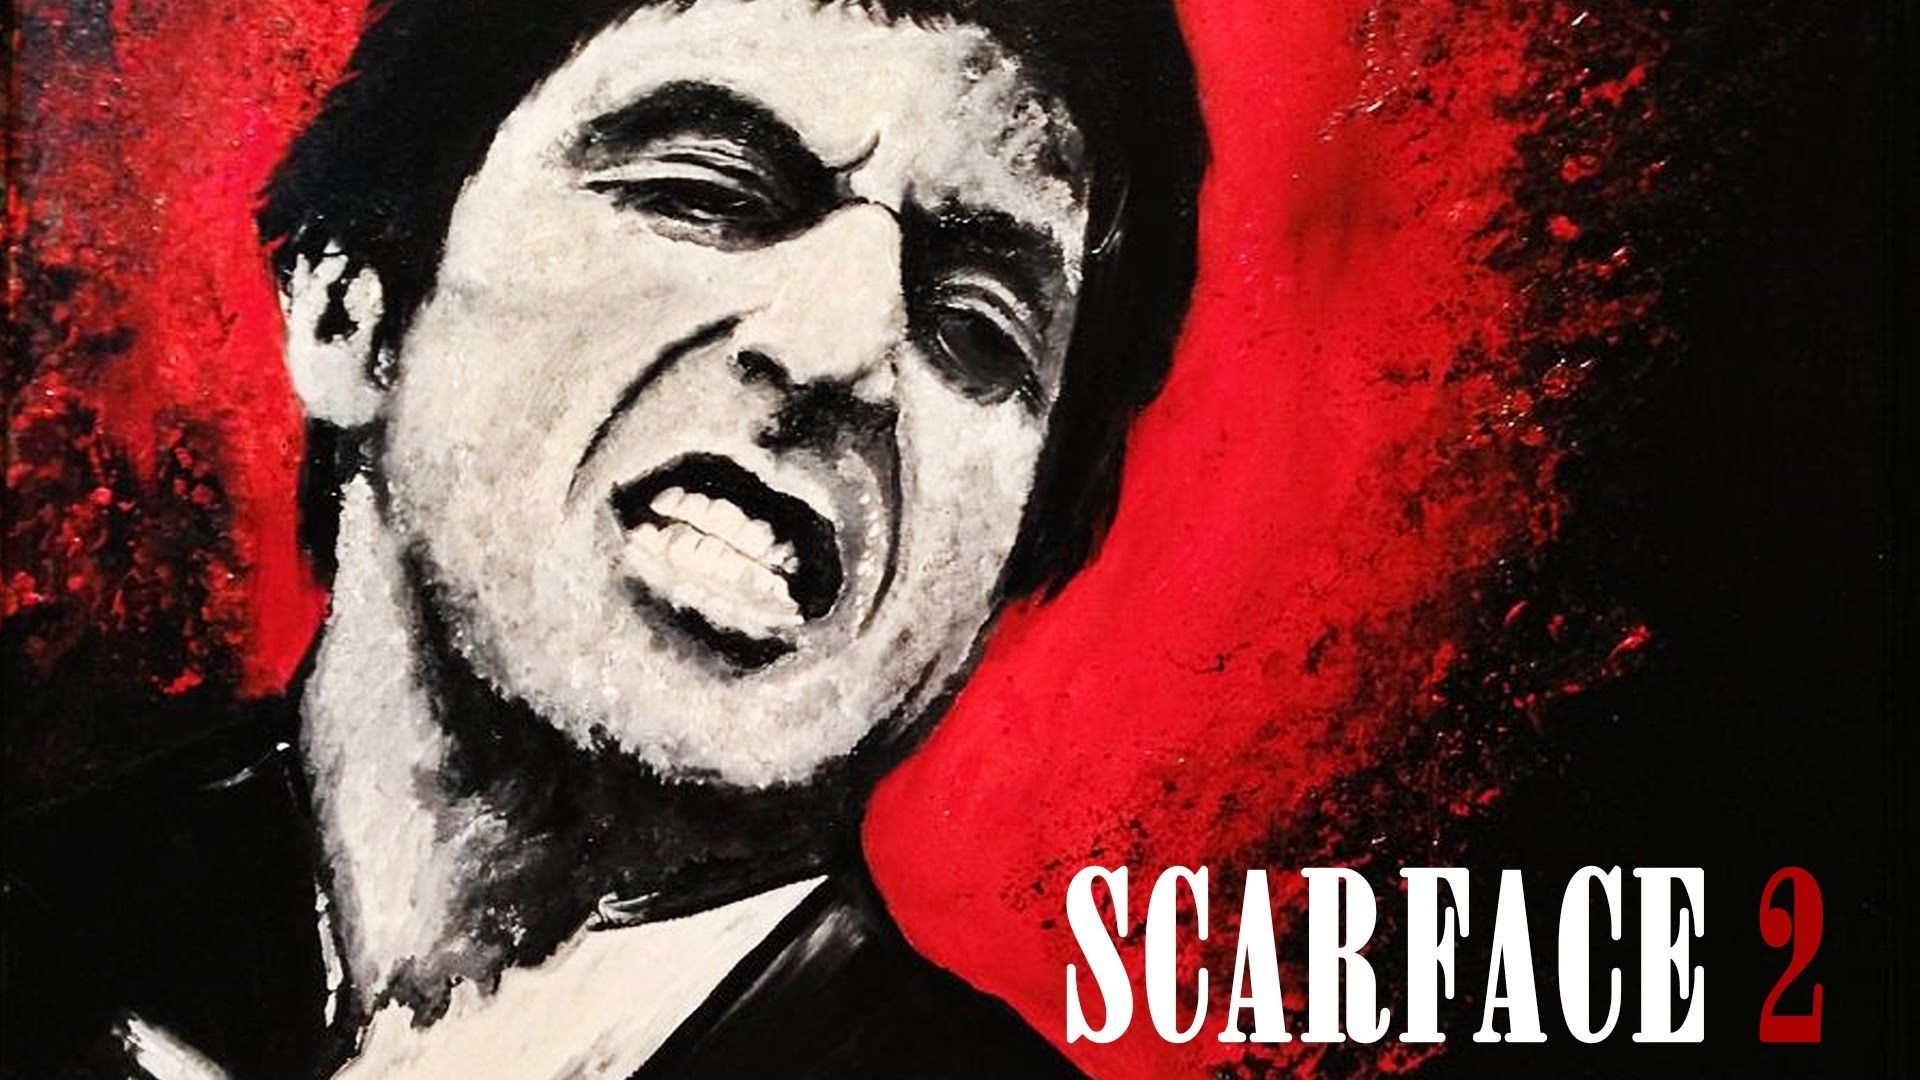 1920x1080  80+ Scarface Hd Wallpapers on WallpaperPlay">